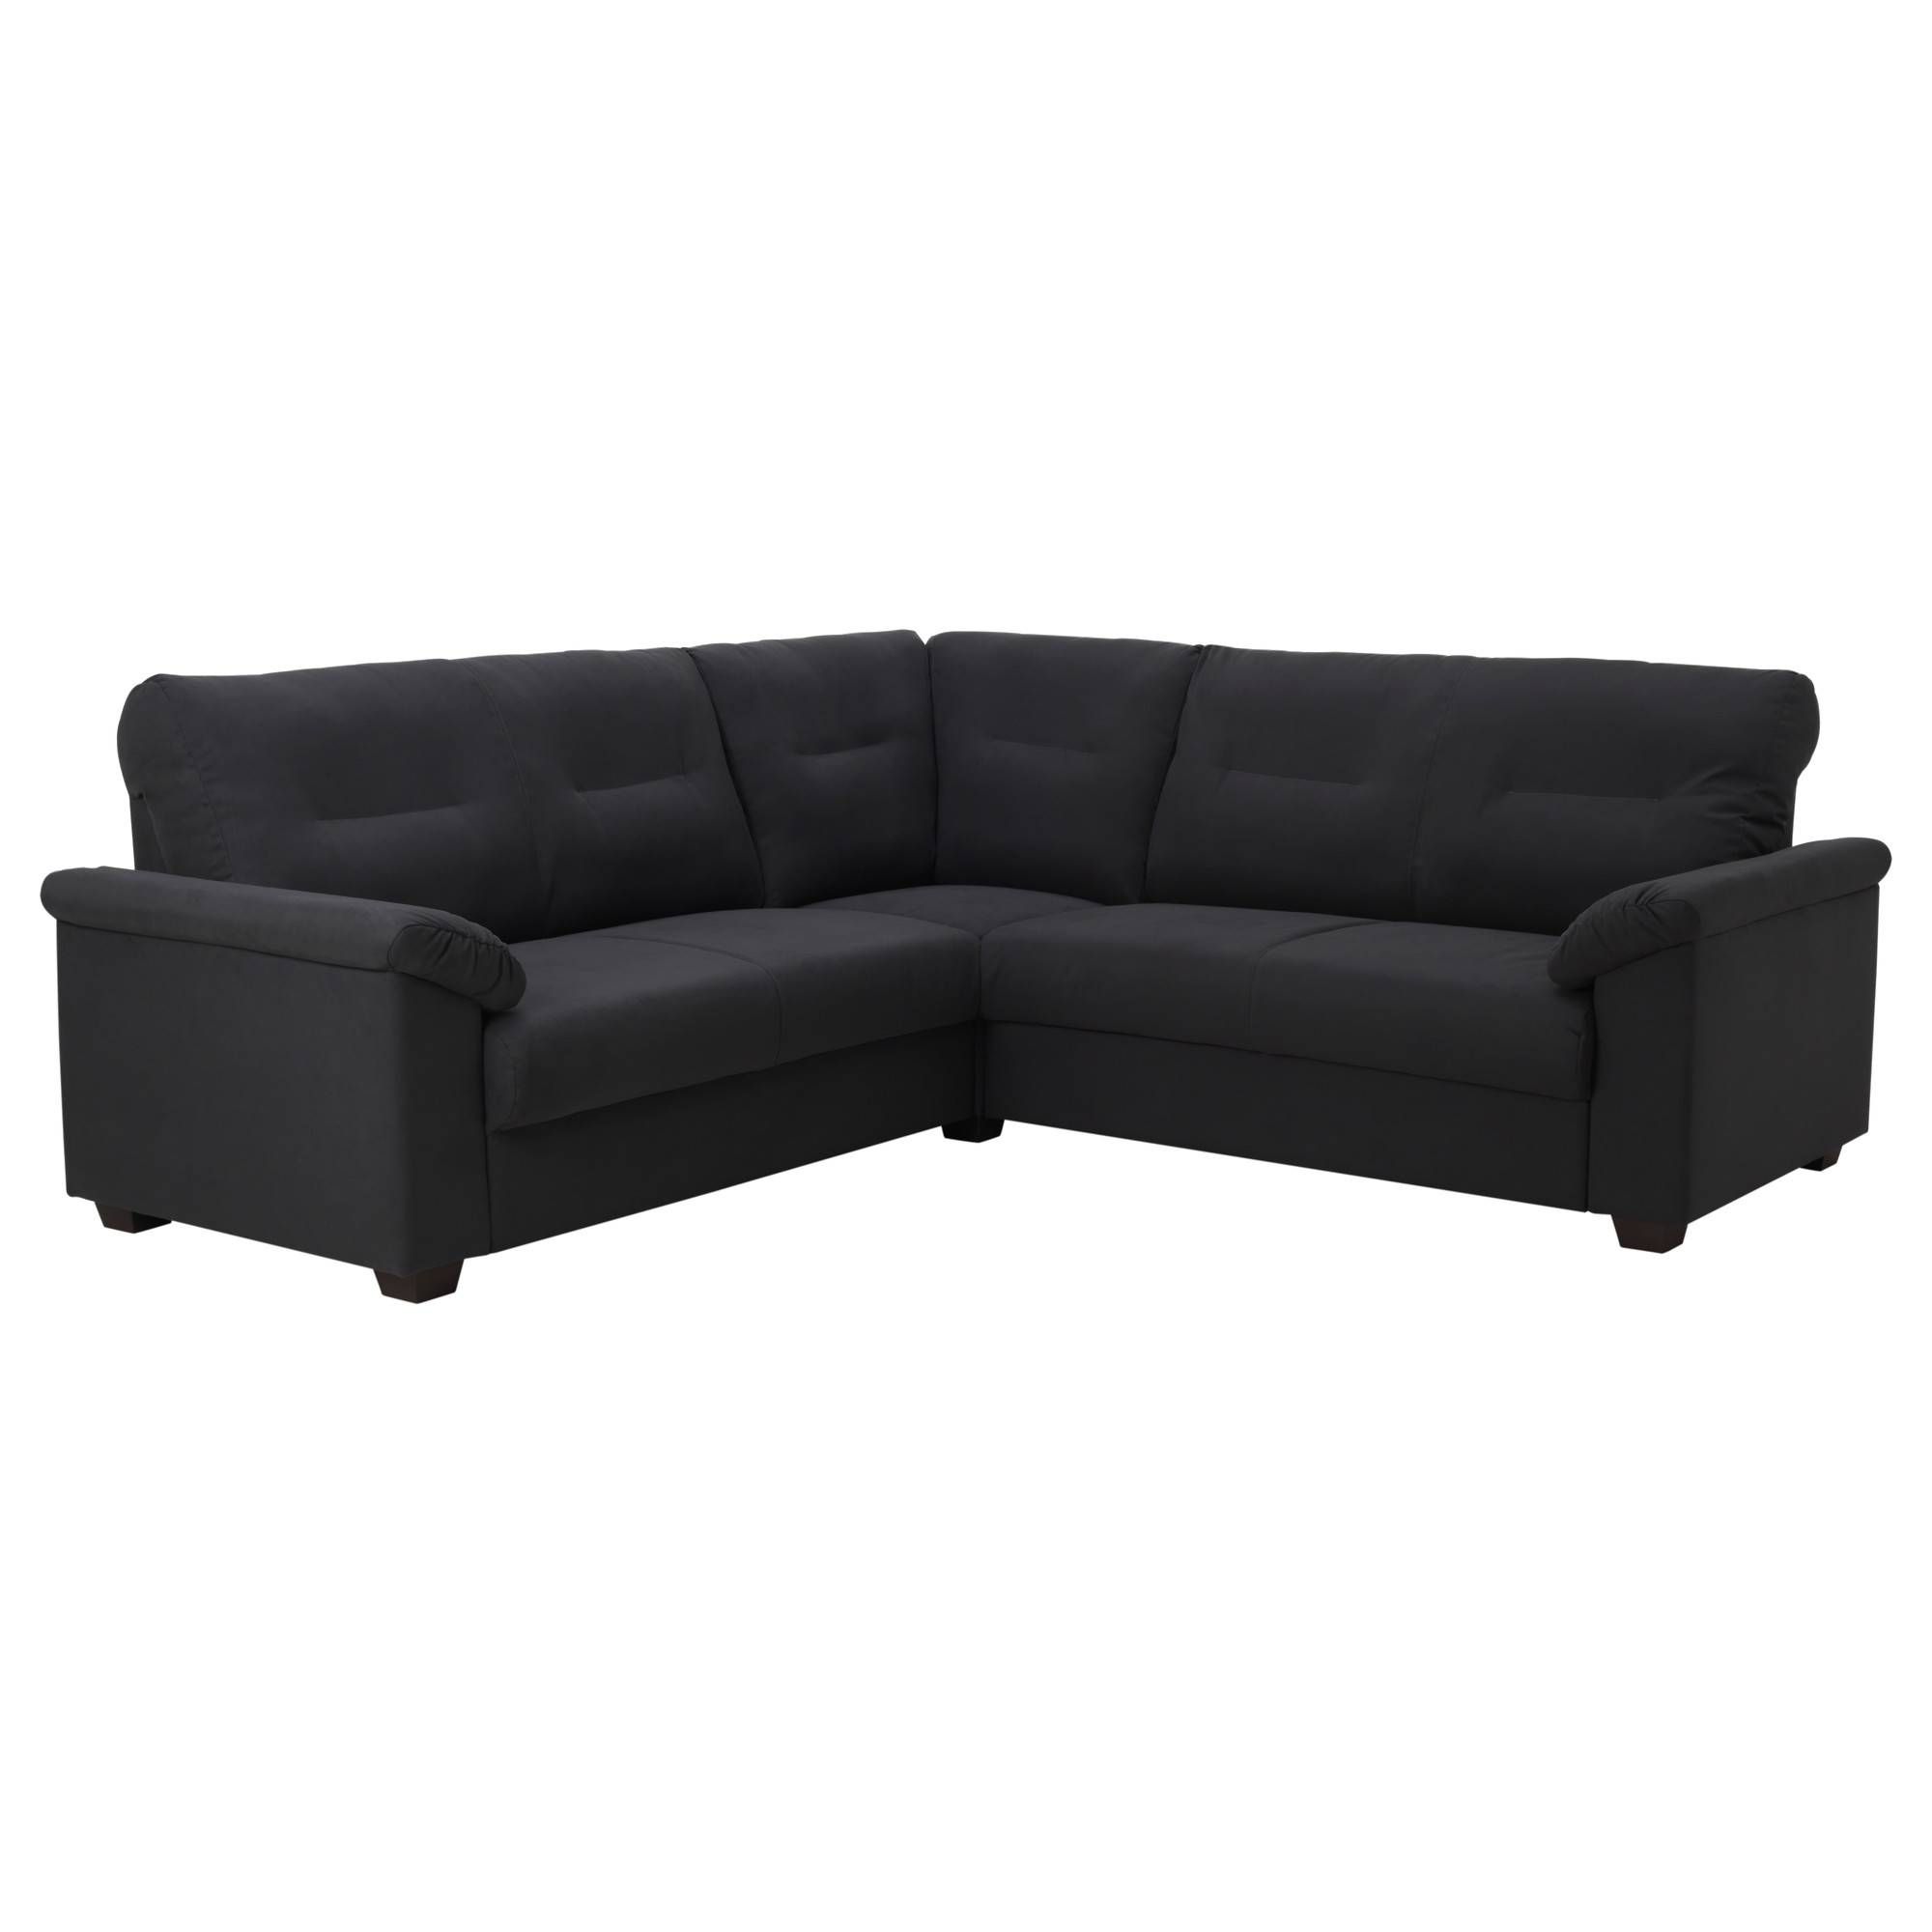 Knislinge Sectional, 4 Seat Corner – Samsta Dark Gray – Ikea Intended For 4 Seat Leather Sofas (View 1 of 30)